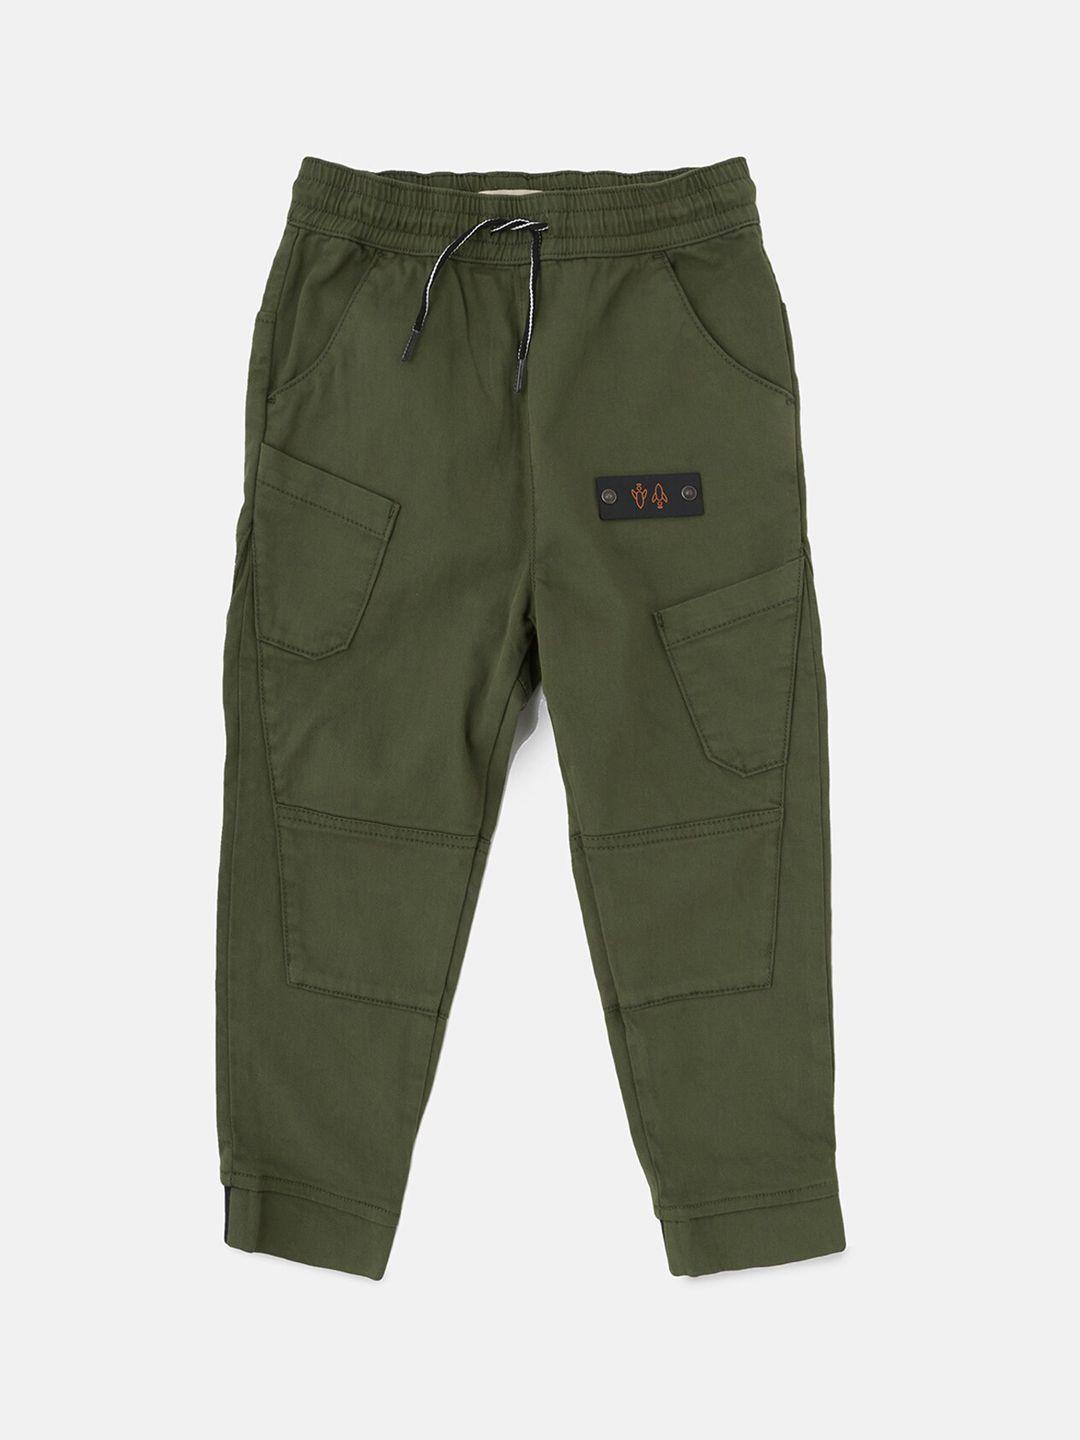 angel & rocket boys olive green cotton cargos trousers